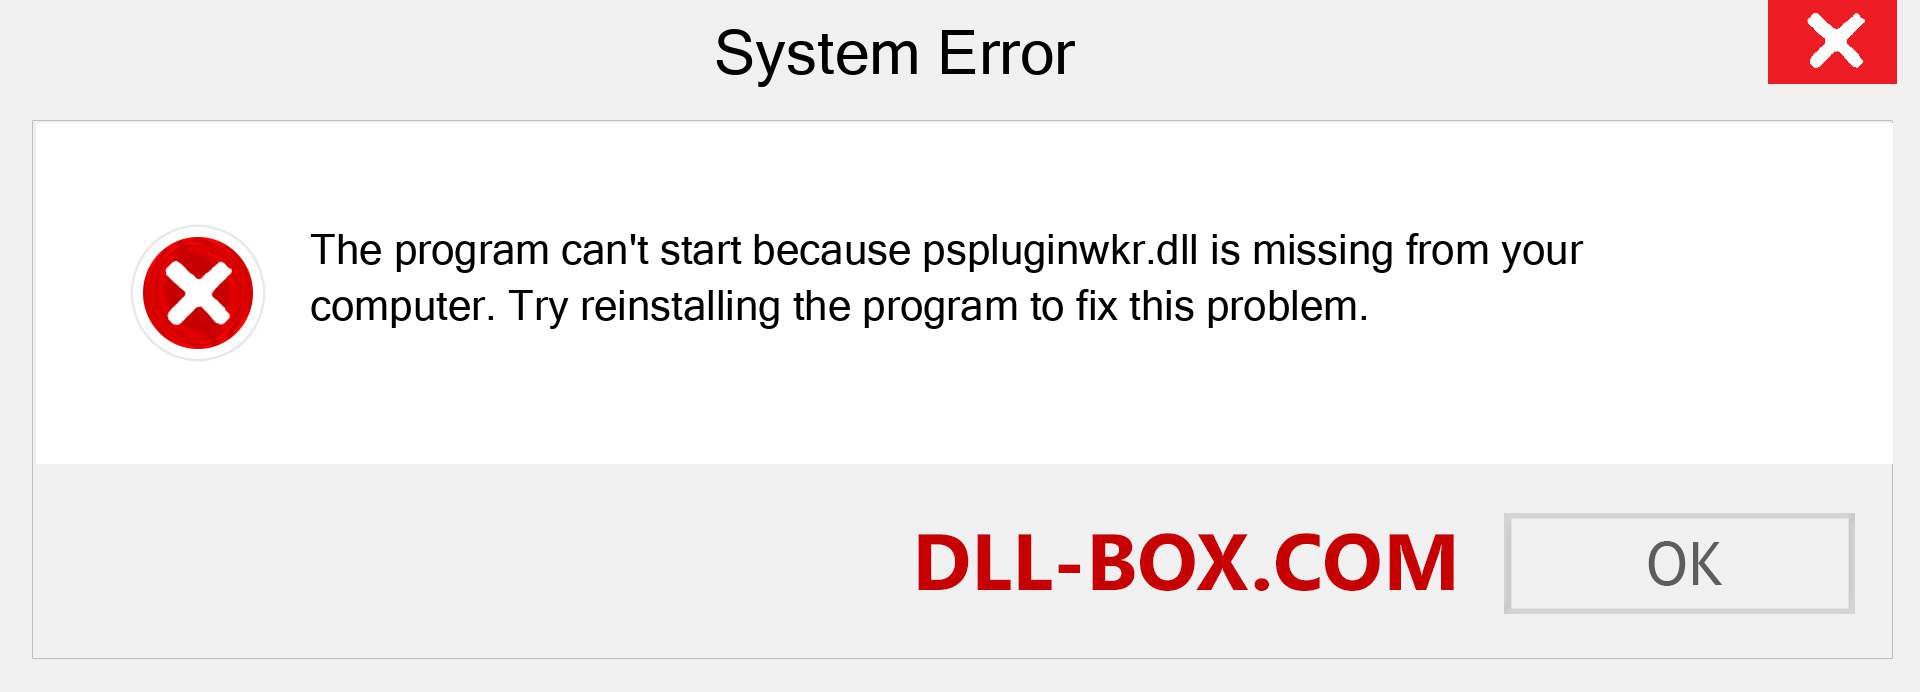  pspluginwkr.dll file is missing?. Download for Windows 7, 8, 10 - Fix  pspluginwkr dll Missing Error on Windows, photos, images